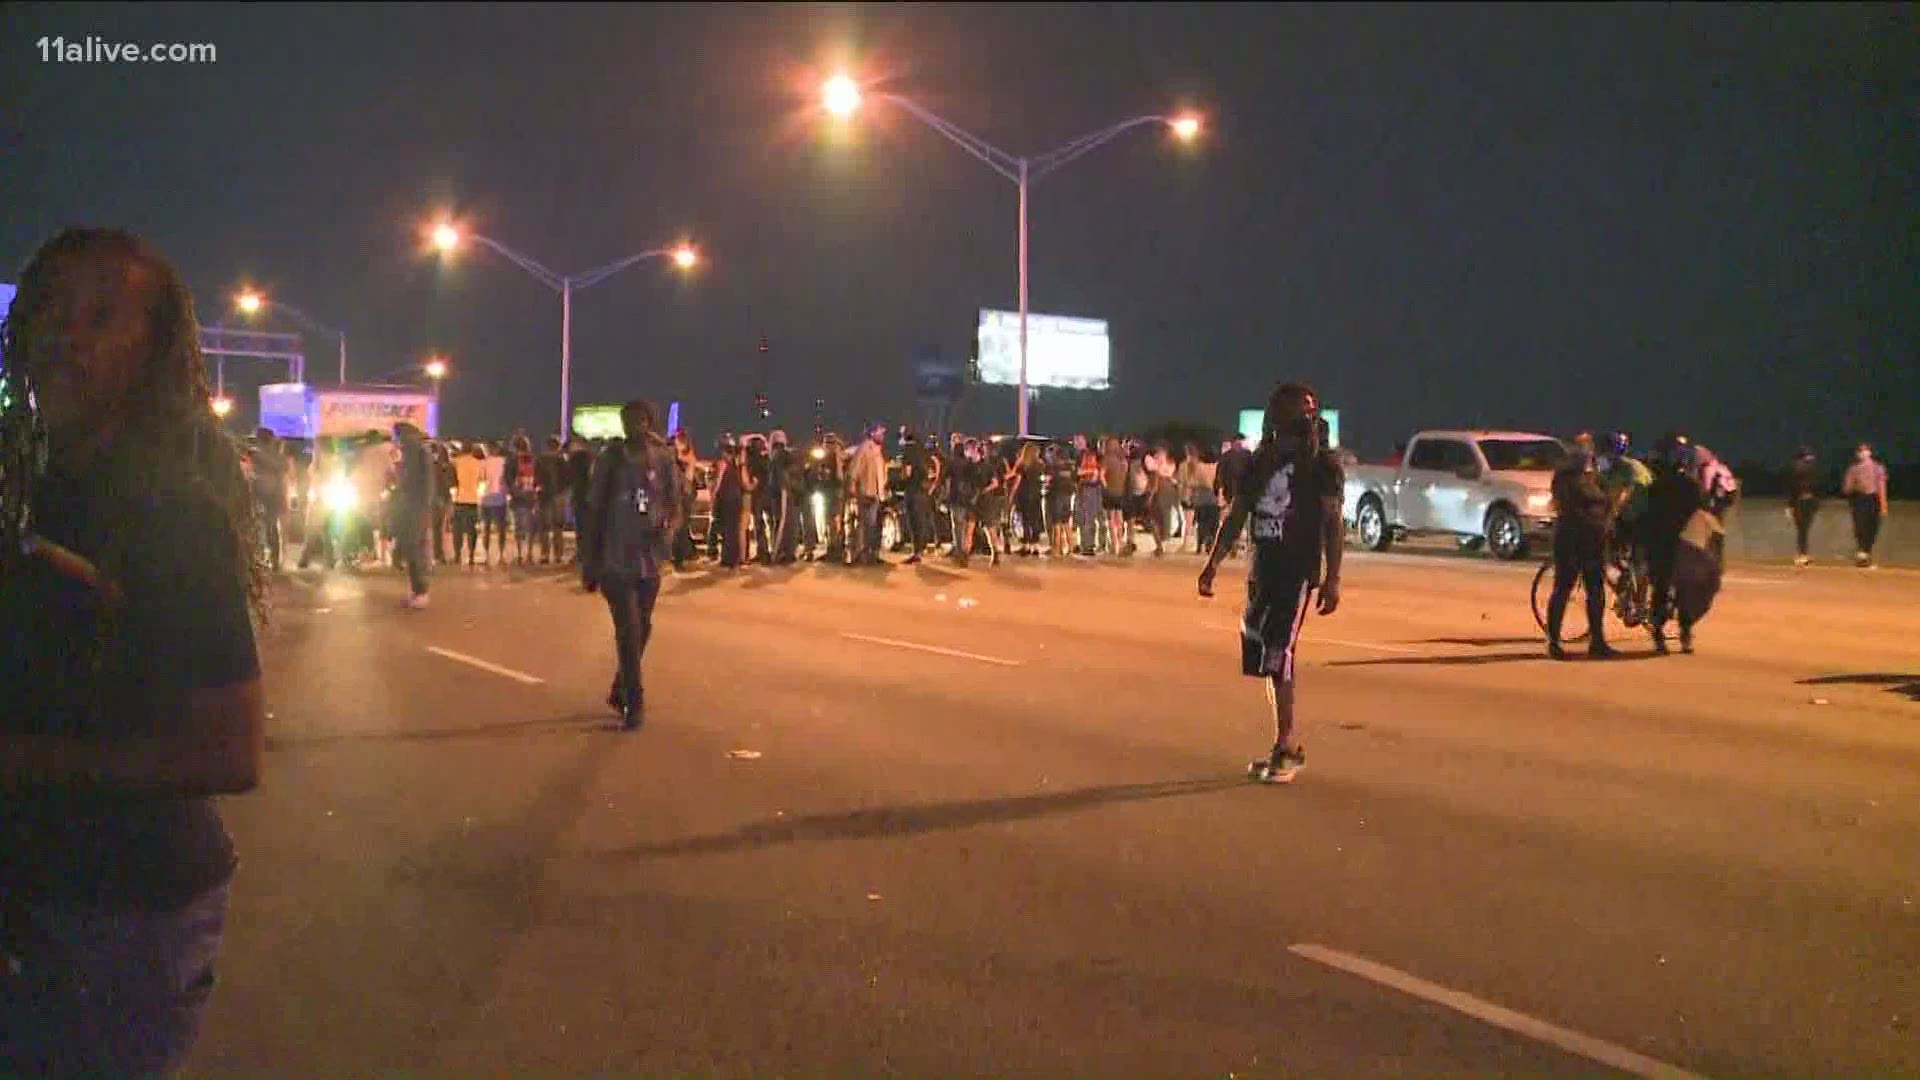 Saturday night protestors entered the downtown connector on I-75/I-85 and blocked all lanes of traffic near where a deadly officer-involved shooting happened.